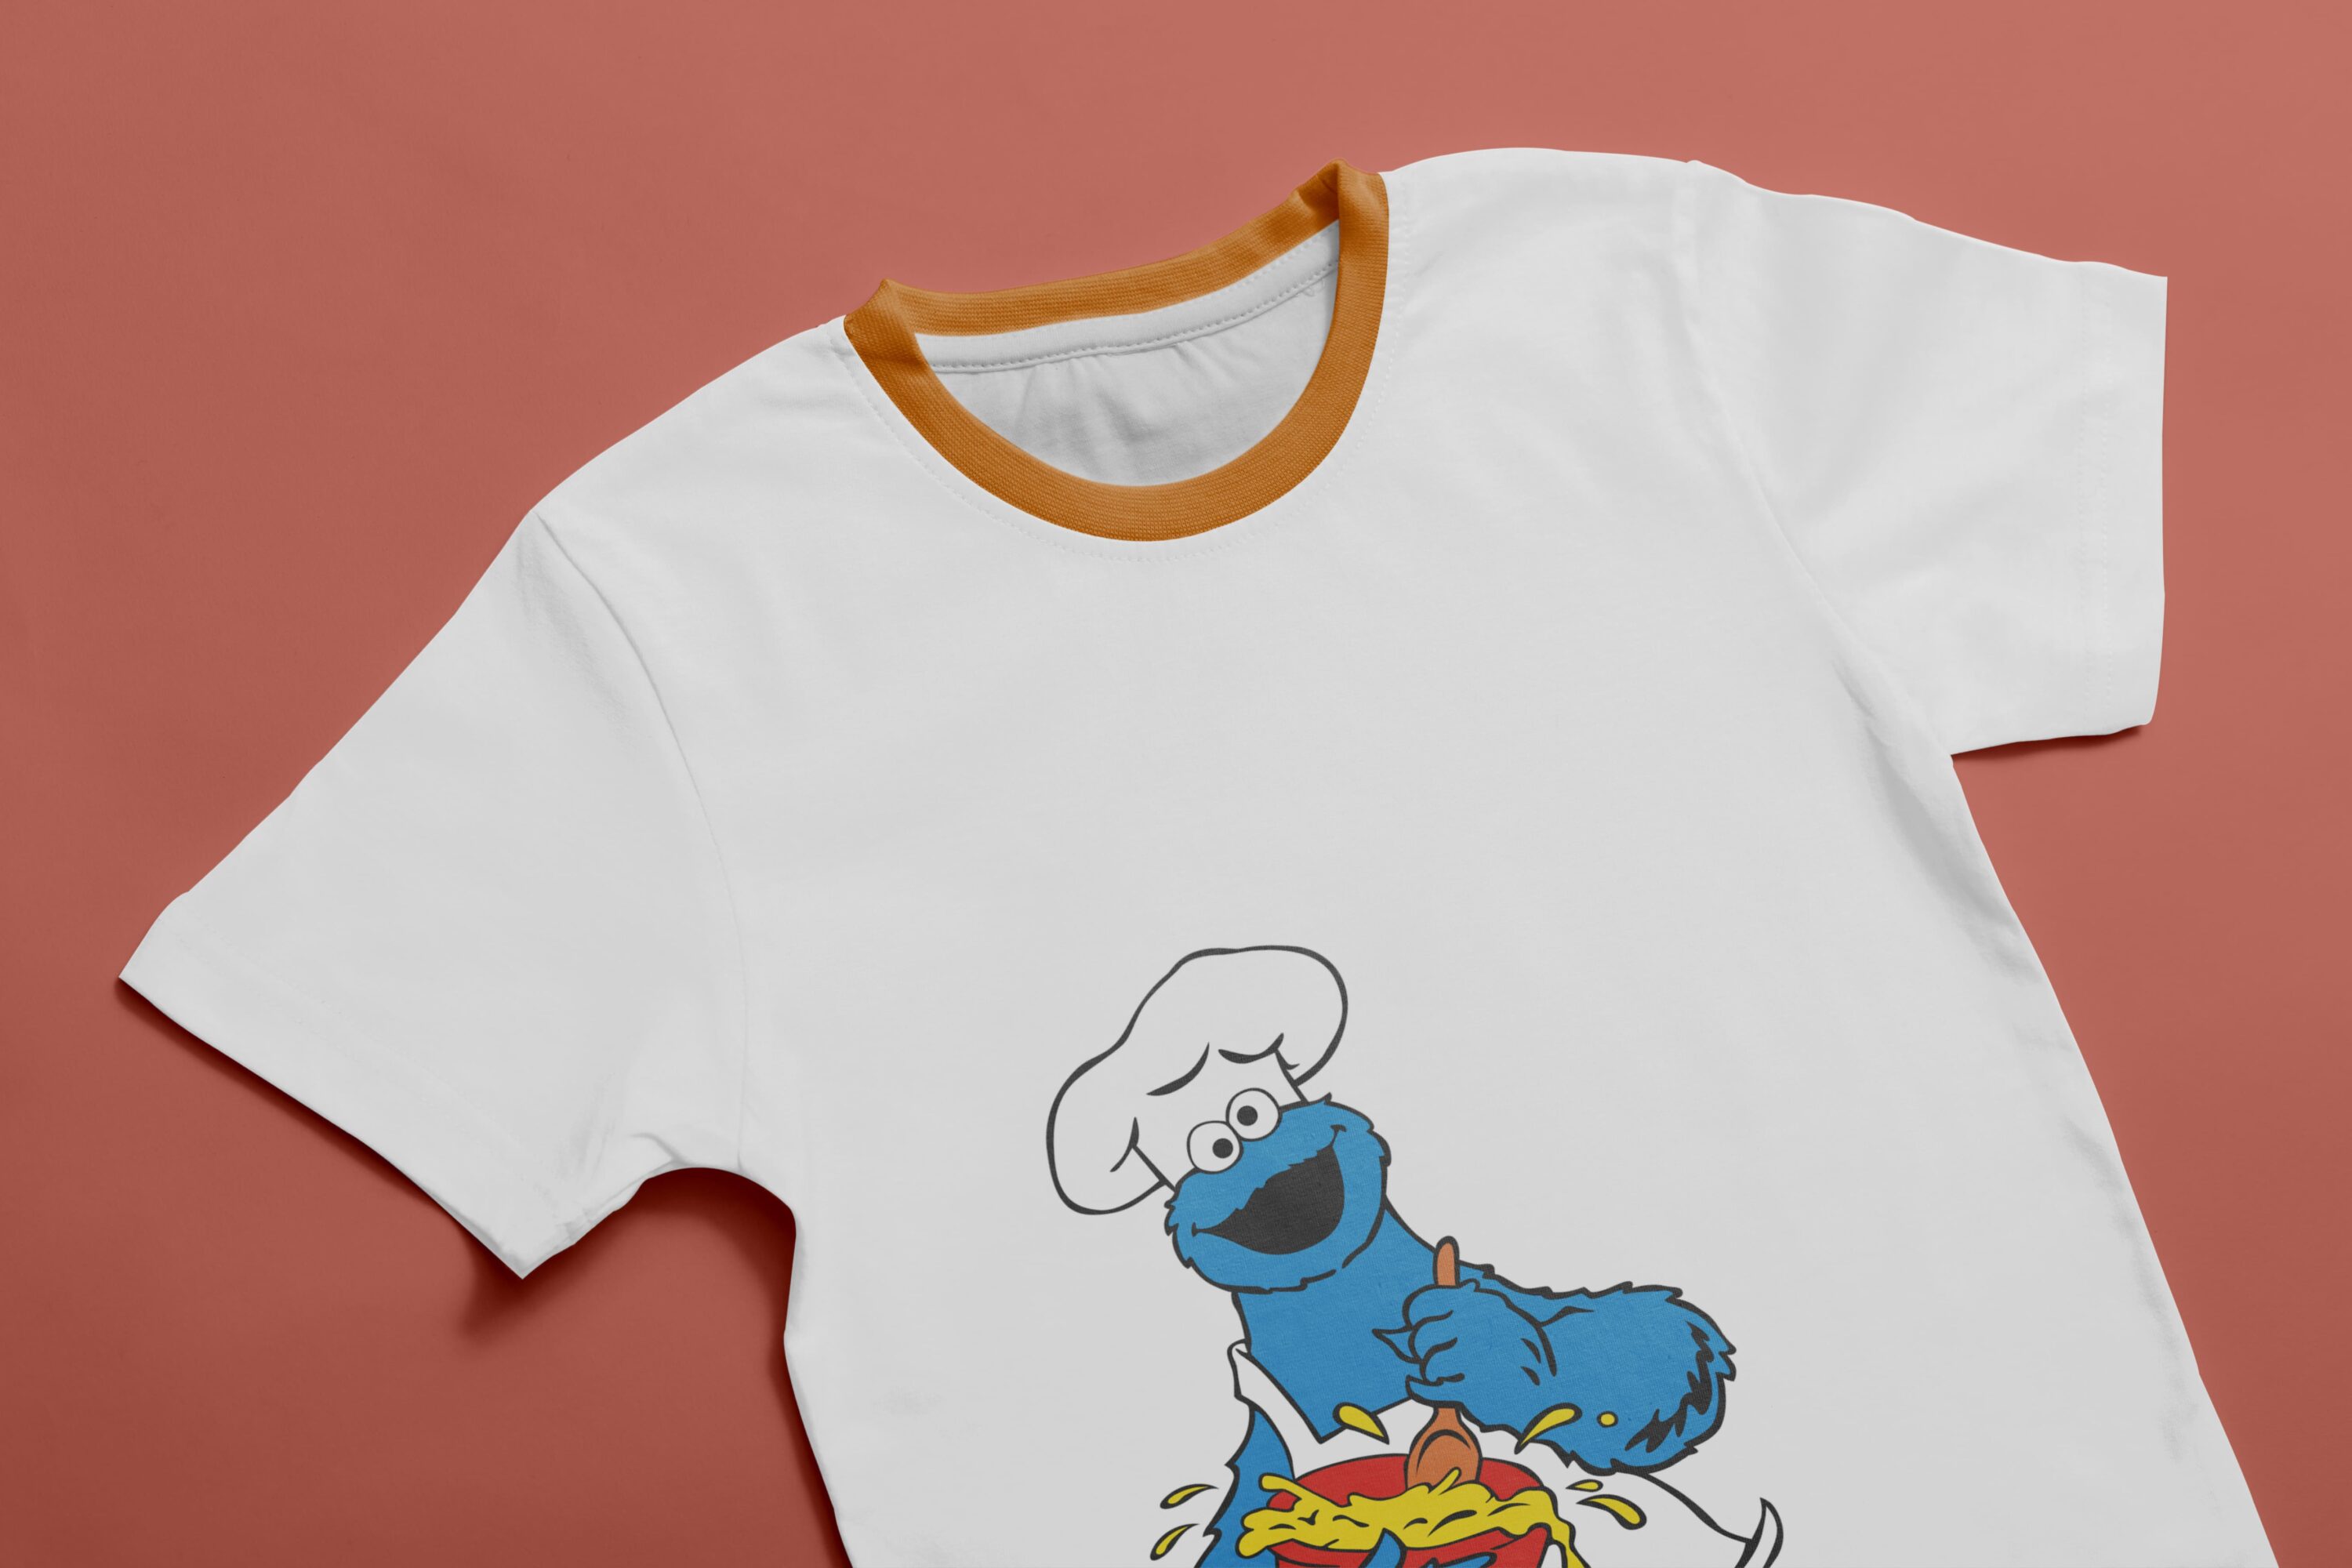 White T-shirt with orange collar and an image of a character - Cookie Monster, who cooks food.